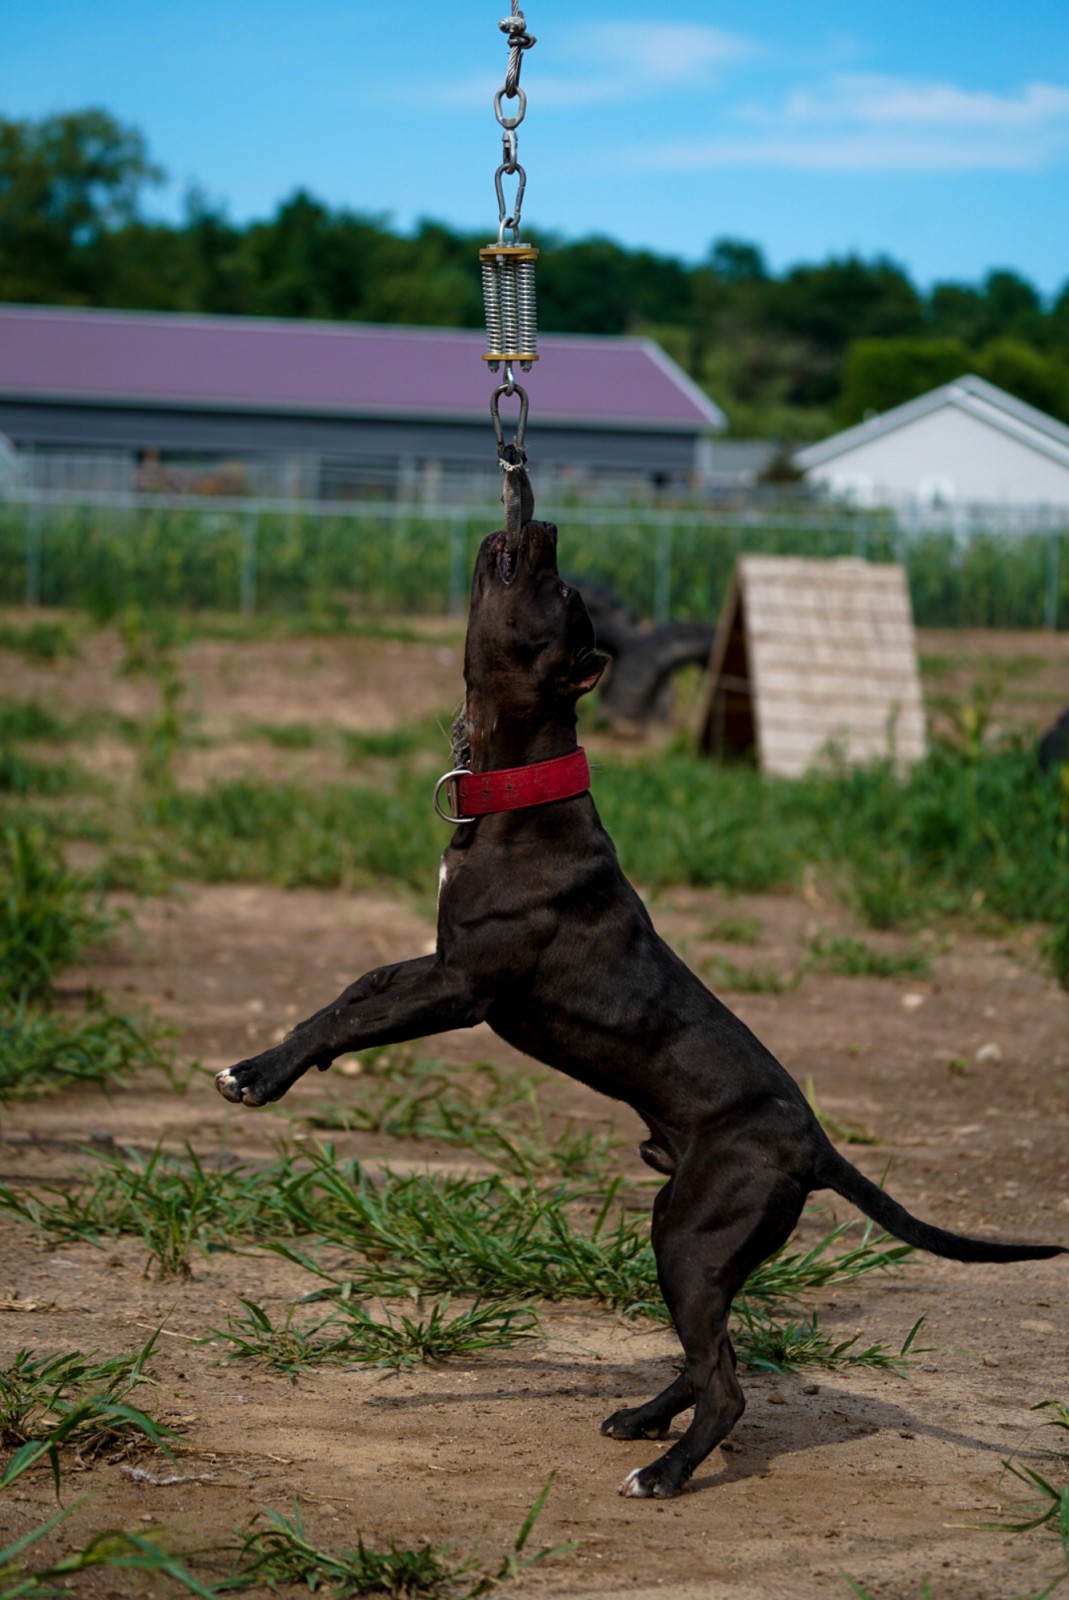 Unleashed Kennelz black XL pit bull, Butcher stands on his hind legs locked onto a spring pole showing off his shredded physique and immaculate structure. 